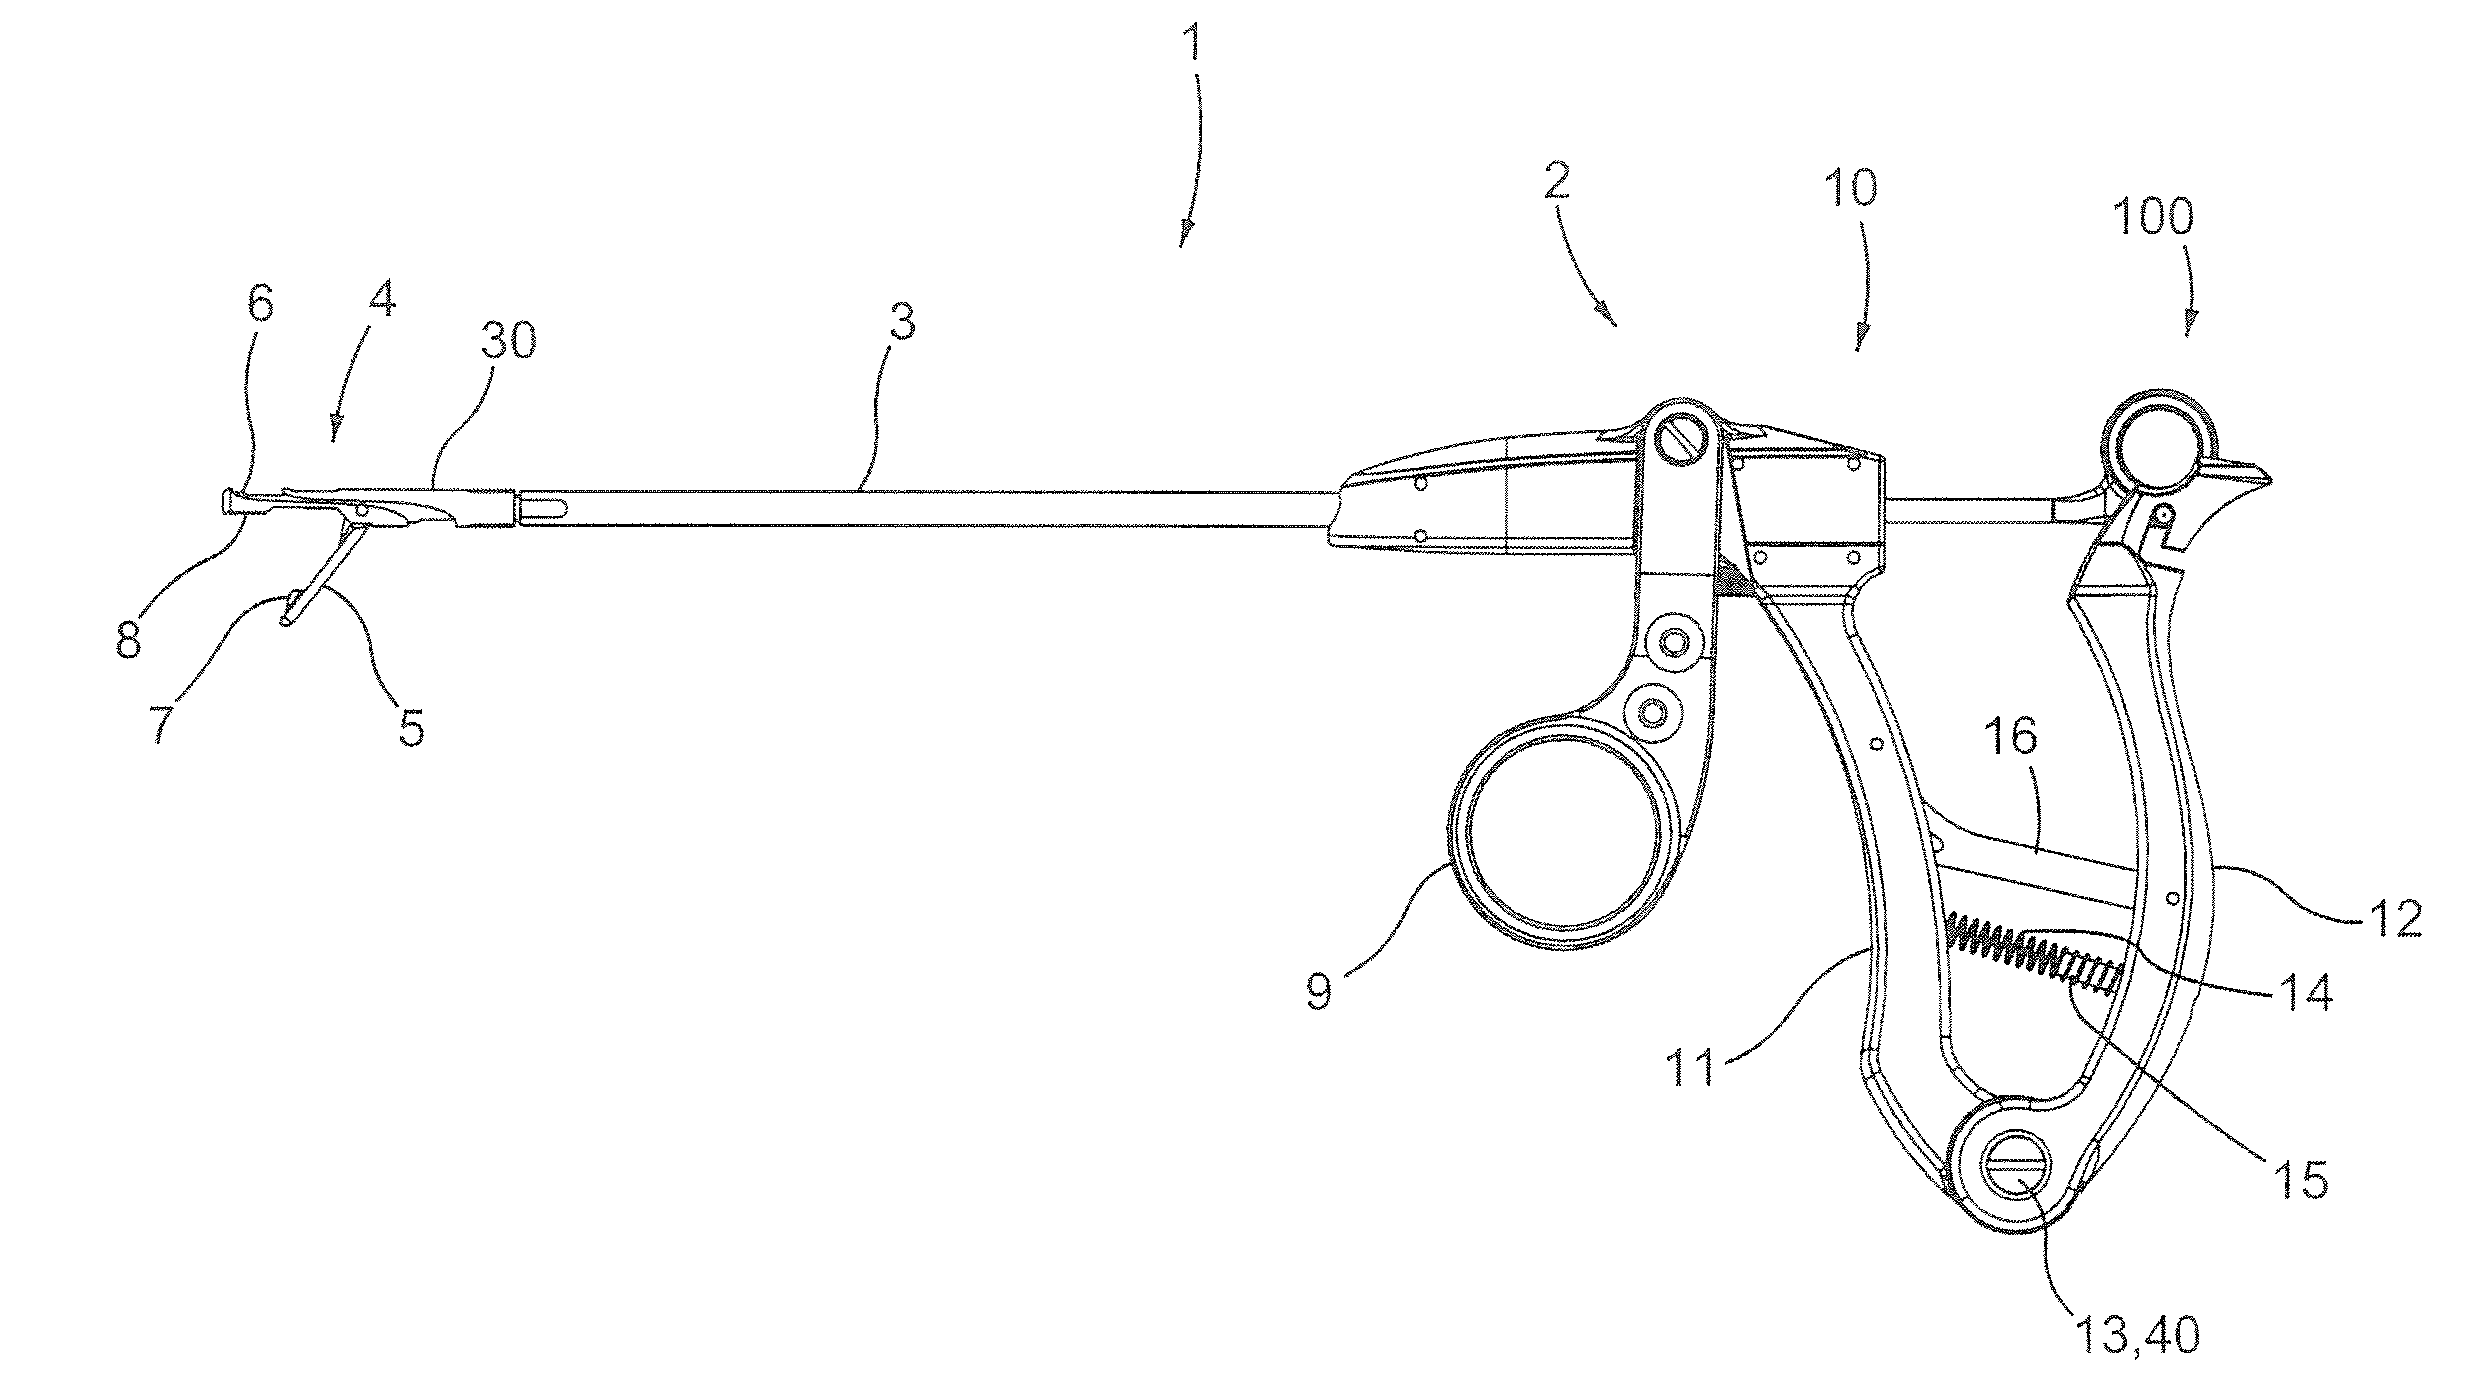 Suture passer device and suture needle